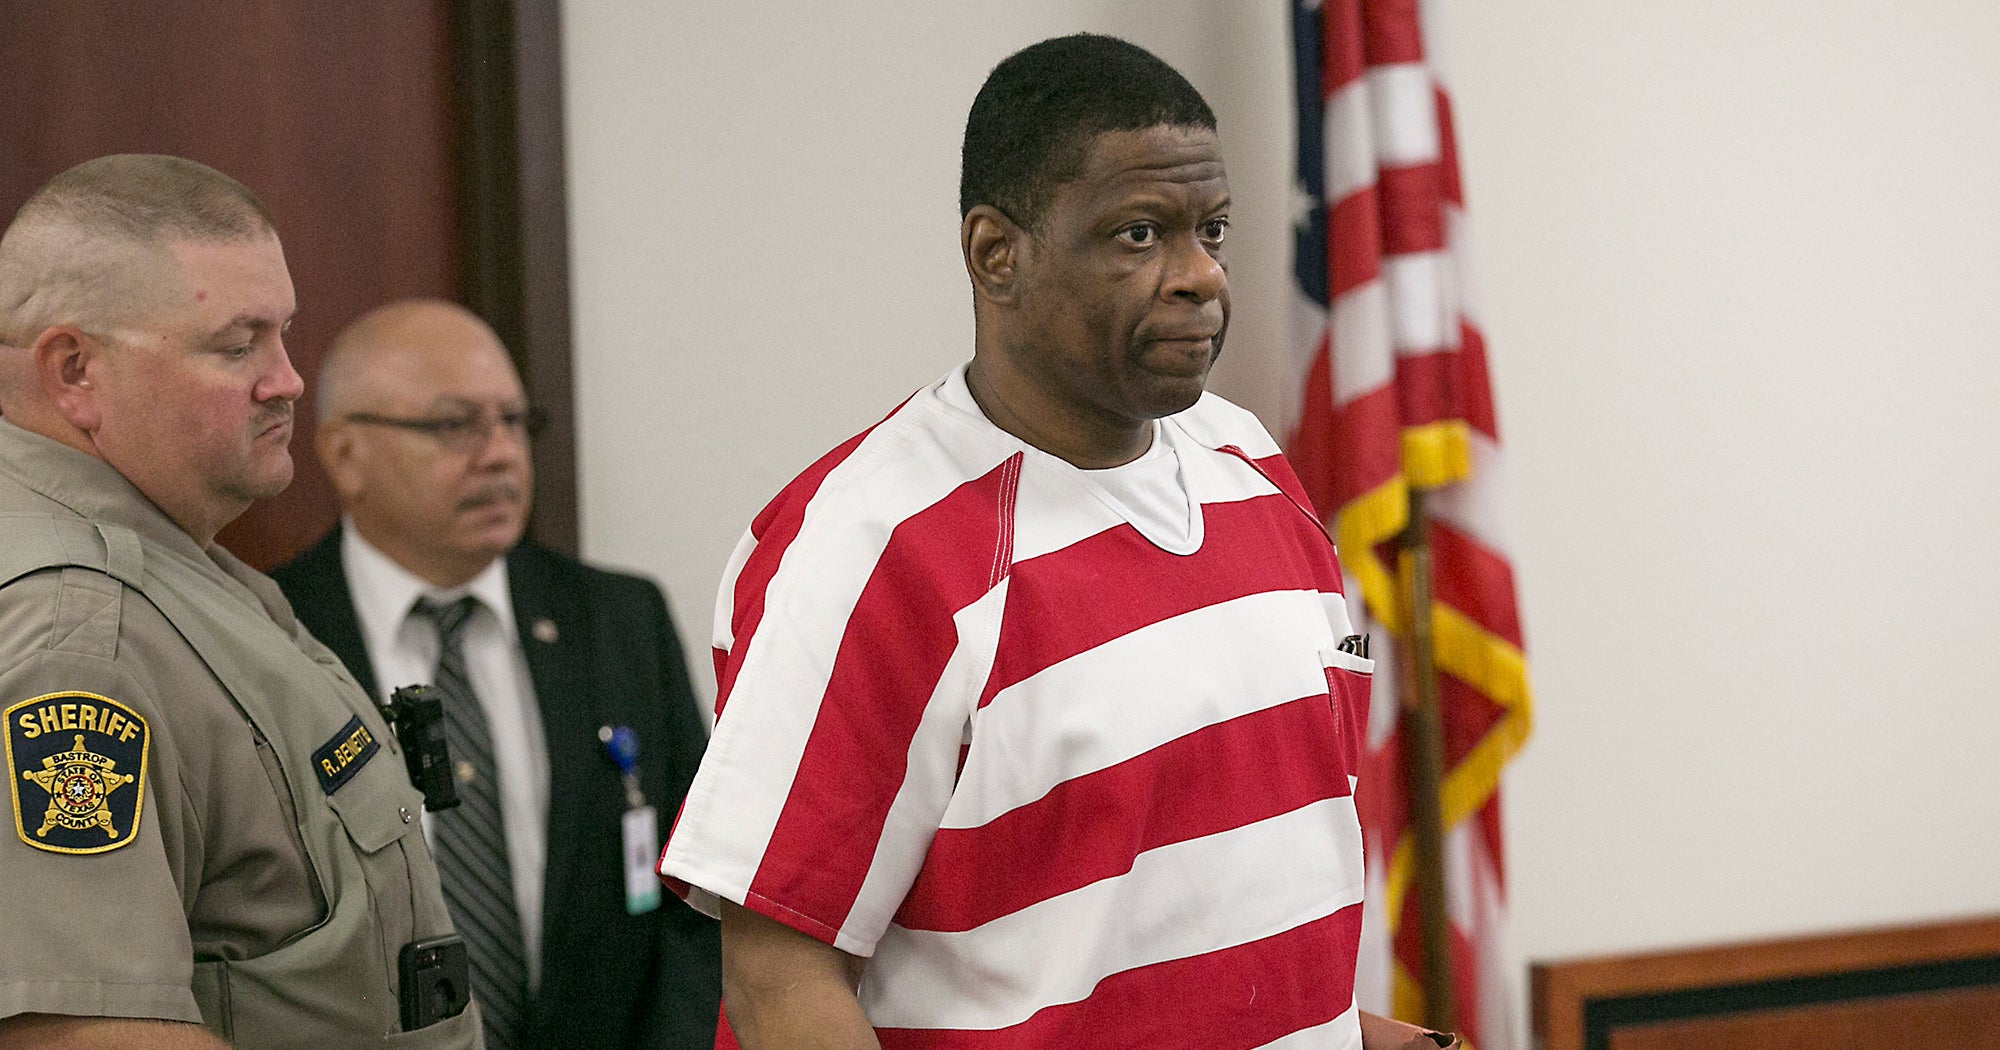 Rodney Reed Texas Death Row Case Controversy, Explained